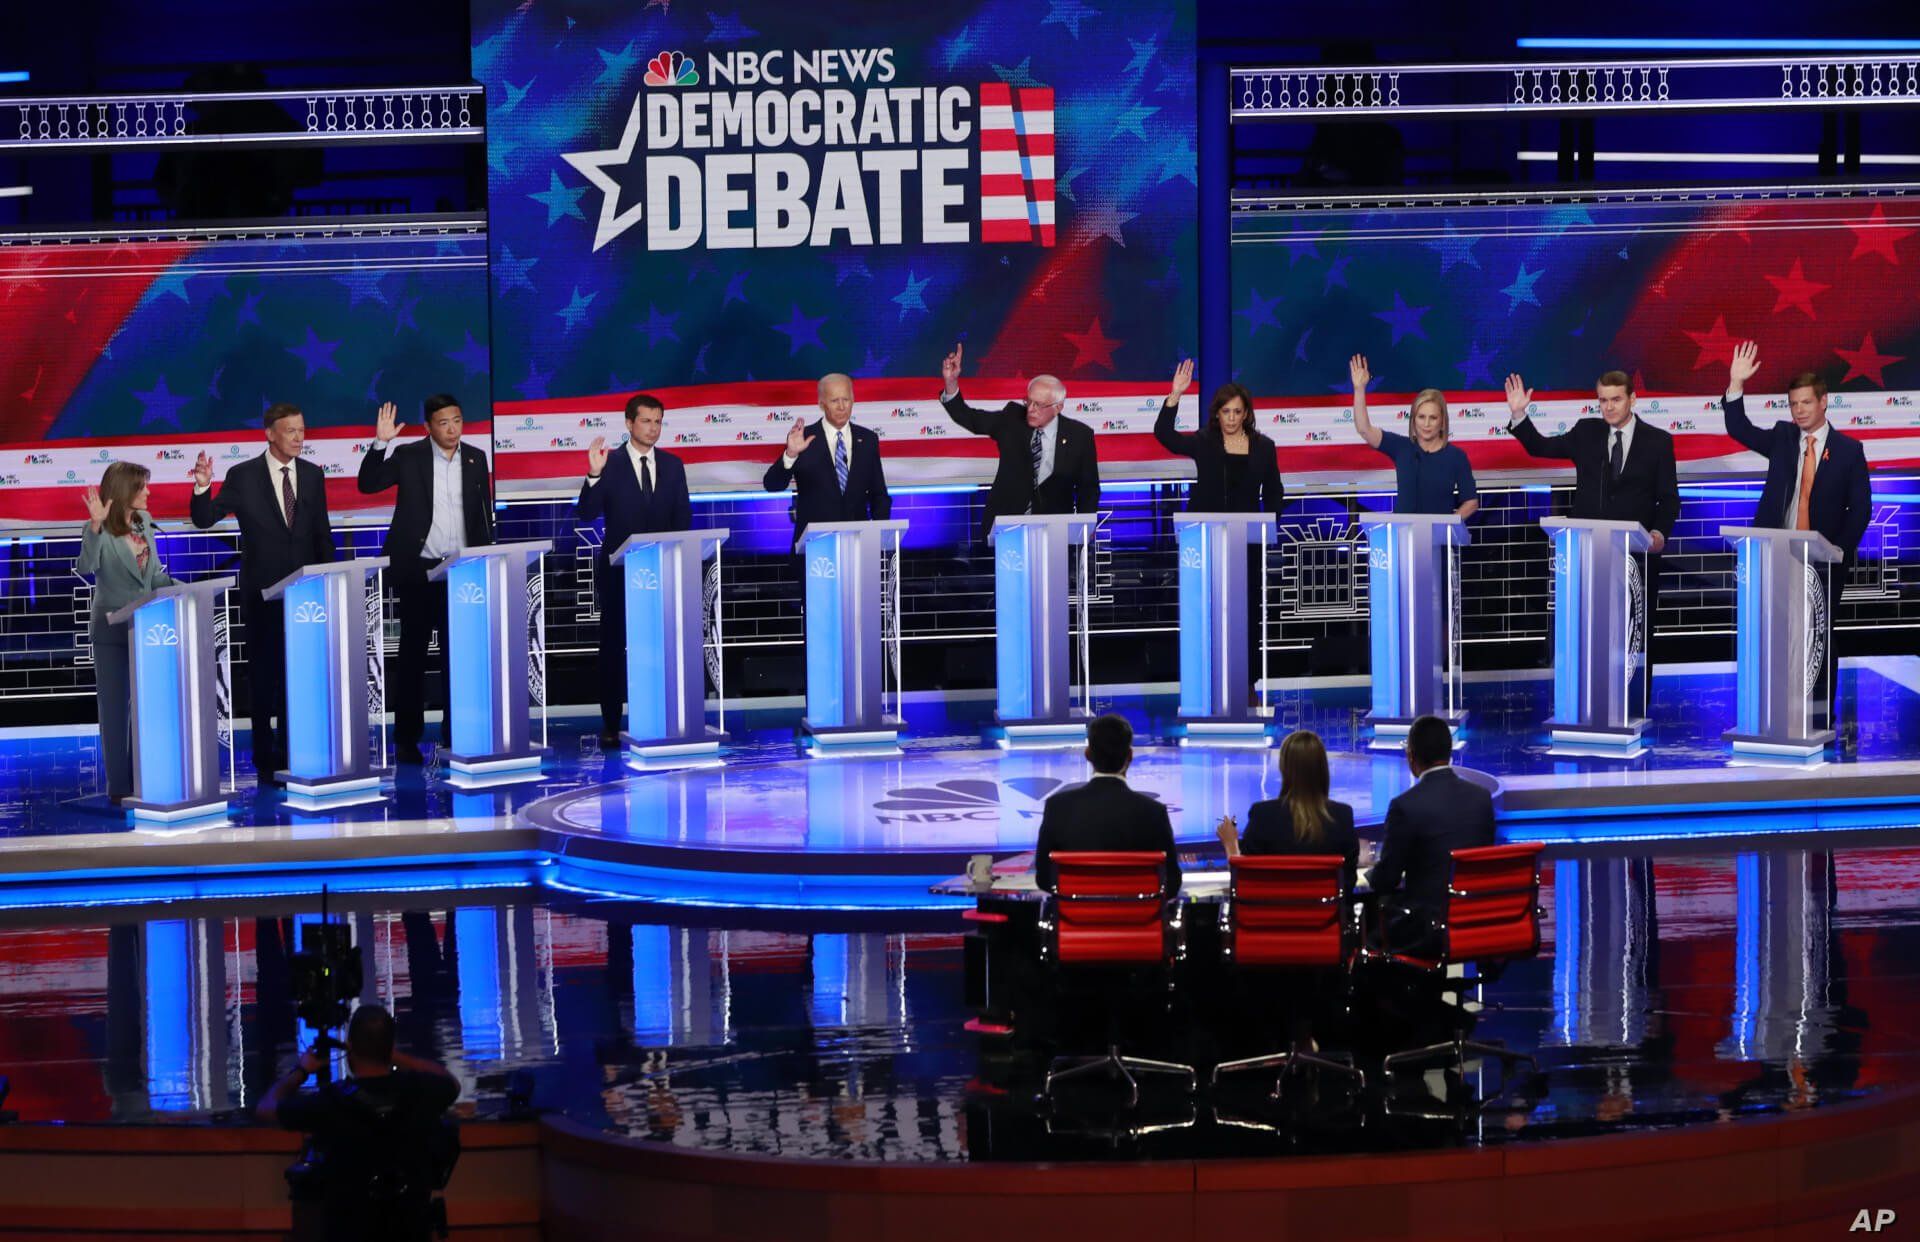 Democratic presidential candidates raise their hands during the Democratic primary debate at the Adrienne Arsht Center for the Performing Arts in Miami, Florida, June 27, 2019.